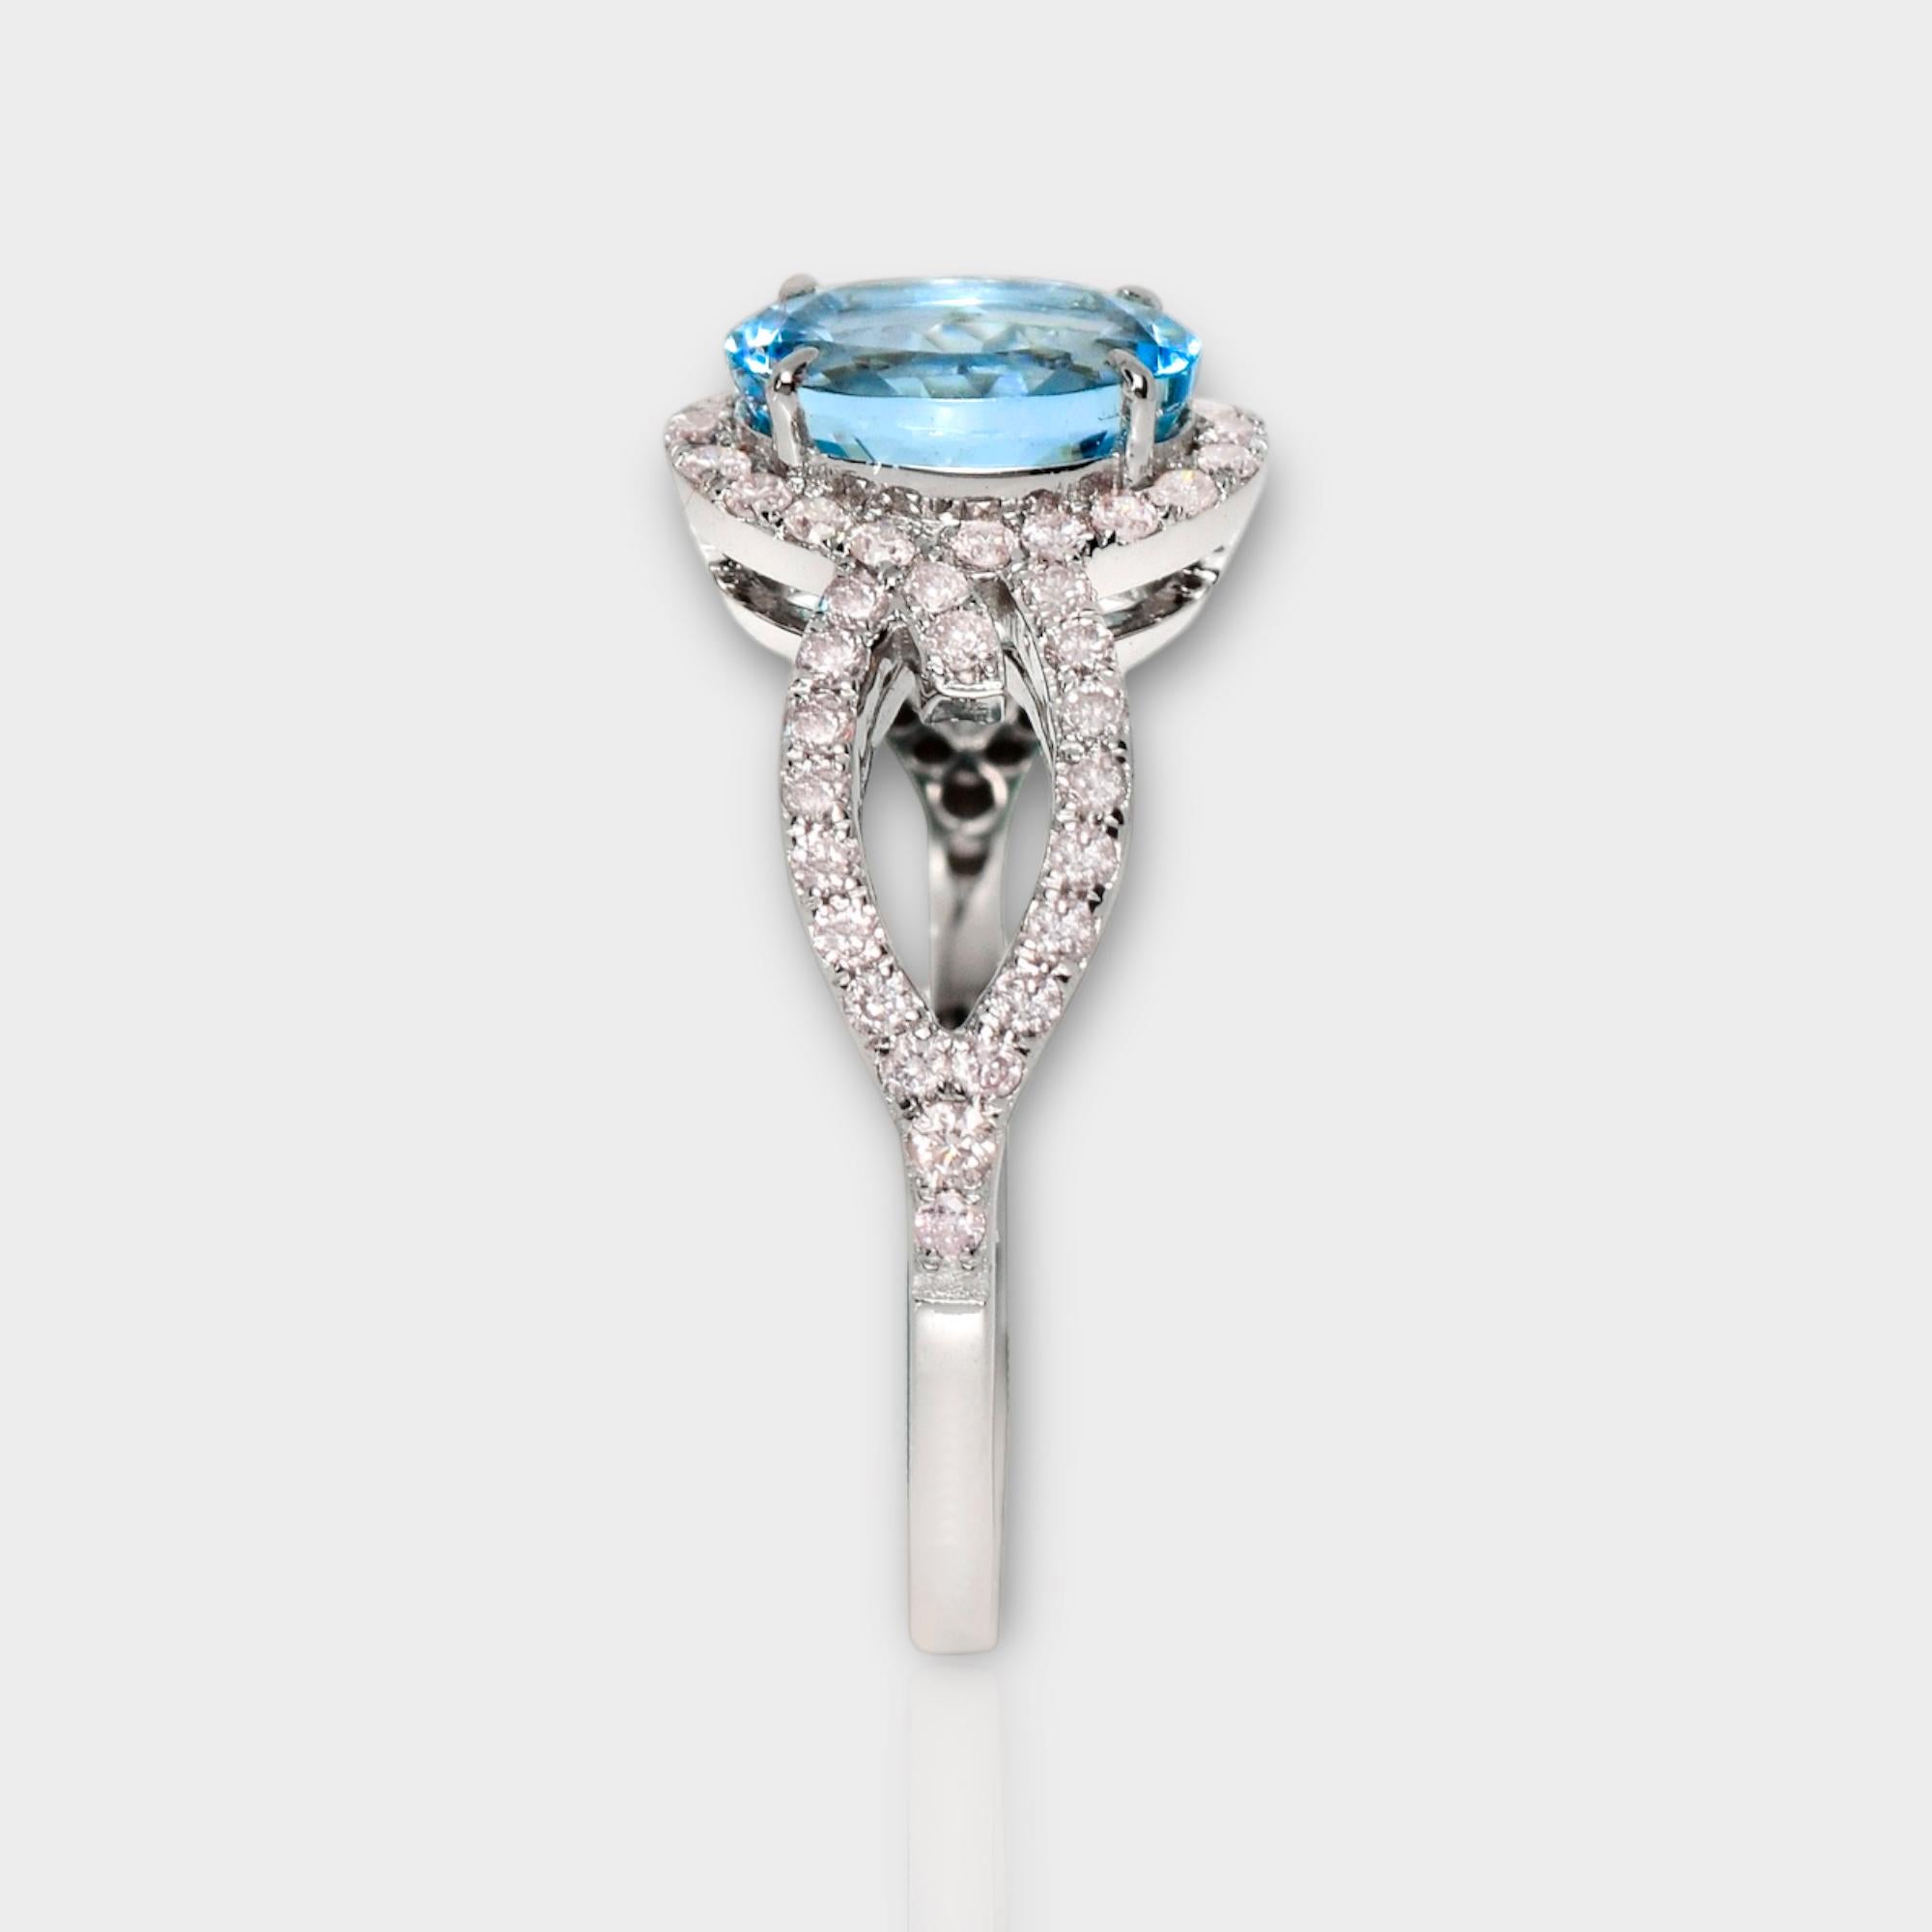 IGI 14K 1.09 Ct Aquamarine&Pink Diamonds Antique Art Deco Style Engagement Ring In New Condition For Sale In Kaohsiung City, TW